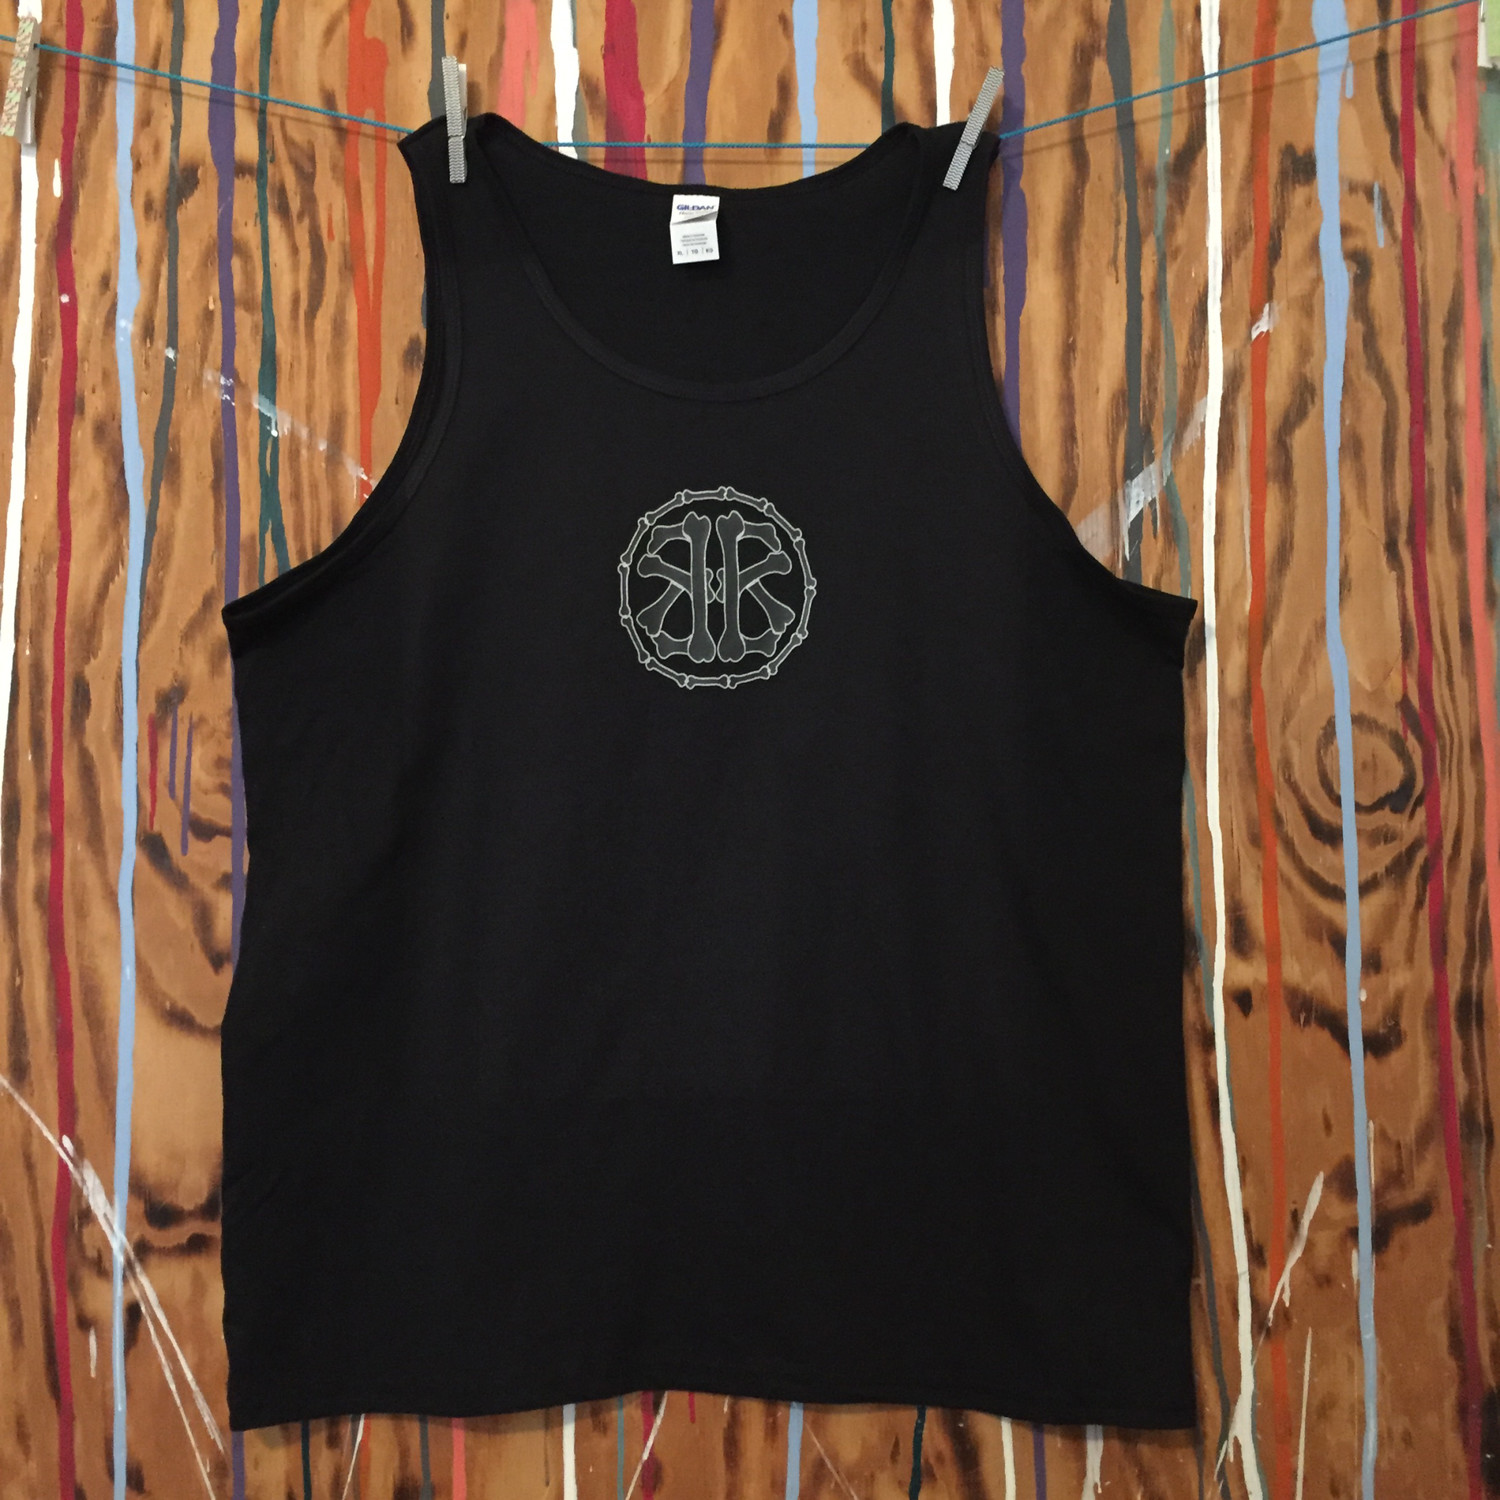 Circle13 Men's Tank Top...Two logo colors available